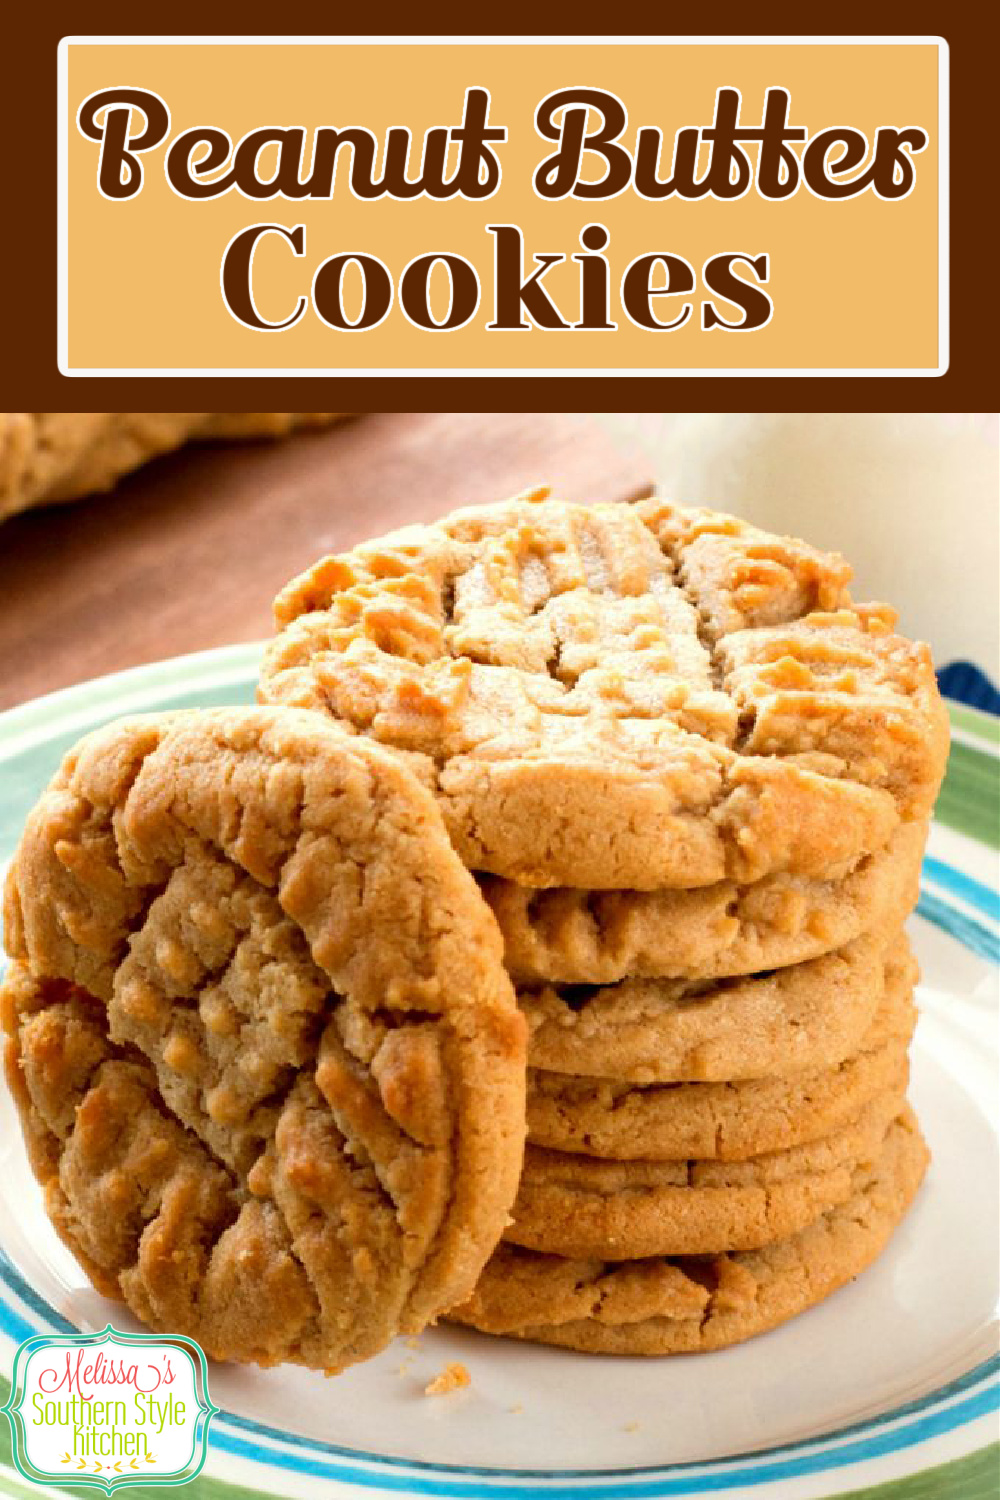 These Classic Soft Peanut Butter Cookies pack a taste of nostalgia in every bite #peanutbuttercookies #classicpeanutbuttercookies #cookies #cookierecipes #holidaybaking #christmascookies #holidays #peanutbutter #comfortfcood #kidfriendly #southernfood #southernrecipes